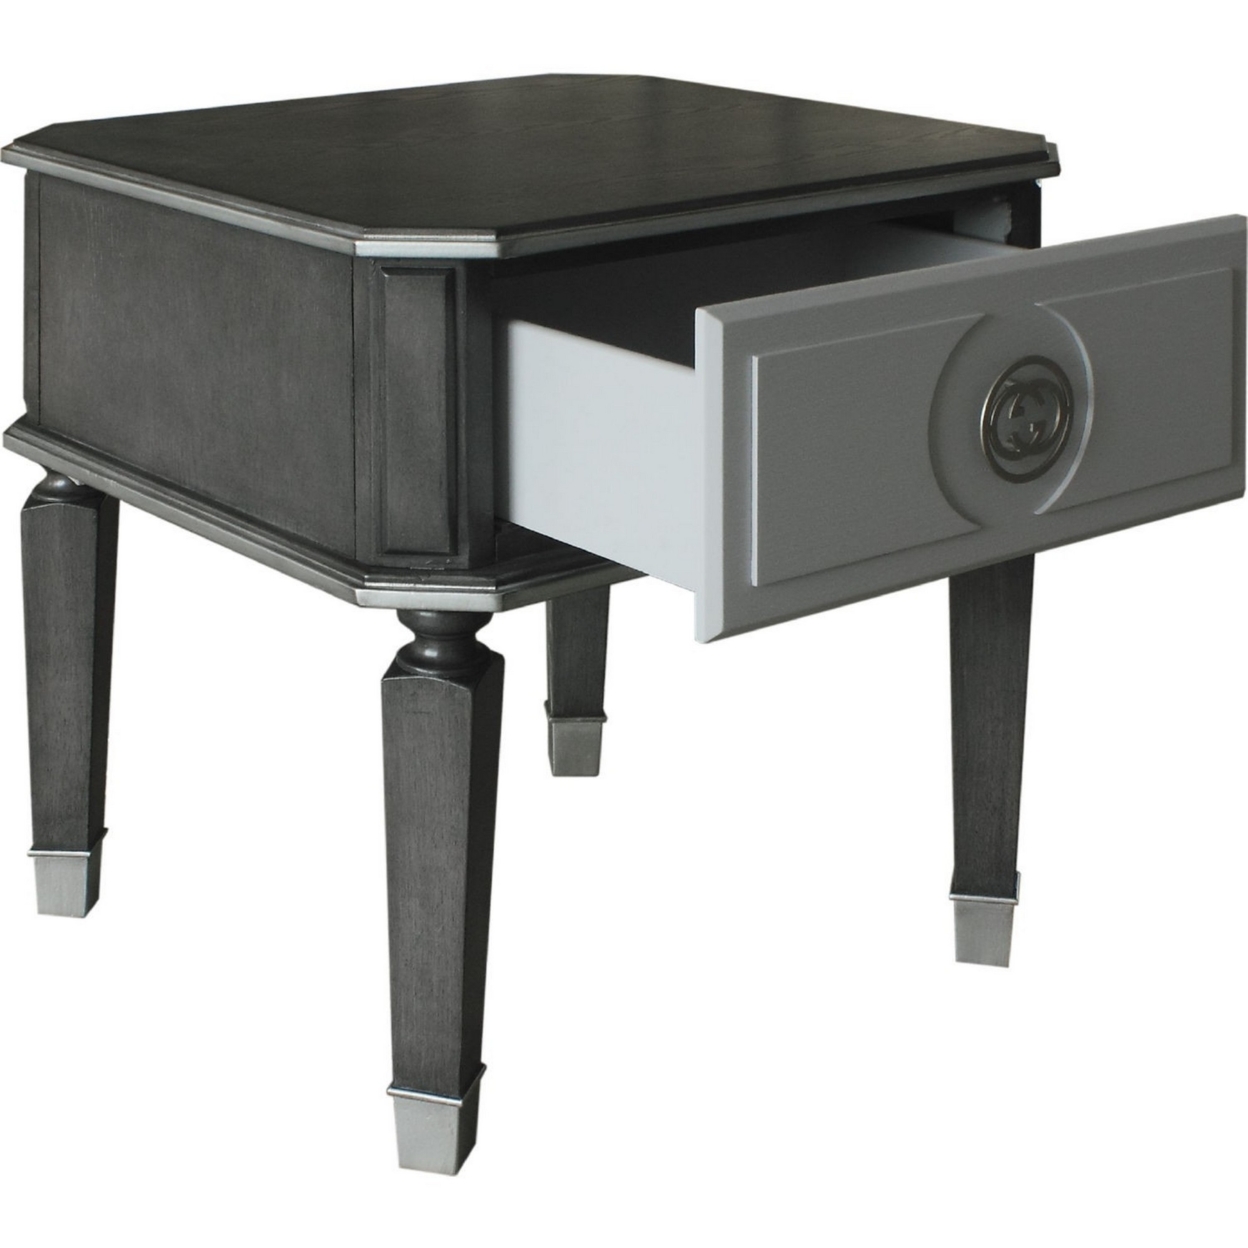 MDF End Table With 1 Drawer And Turned Tapered Legs, Gray And Silver- Saltoro Sherpi